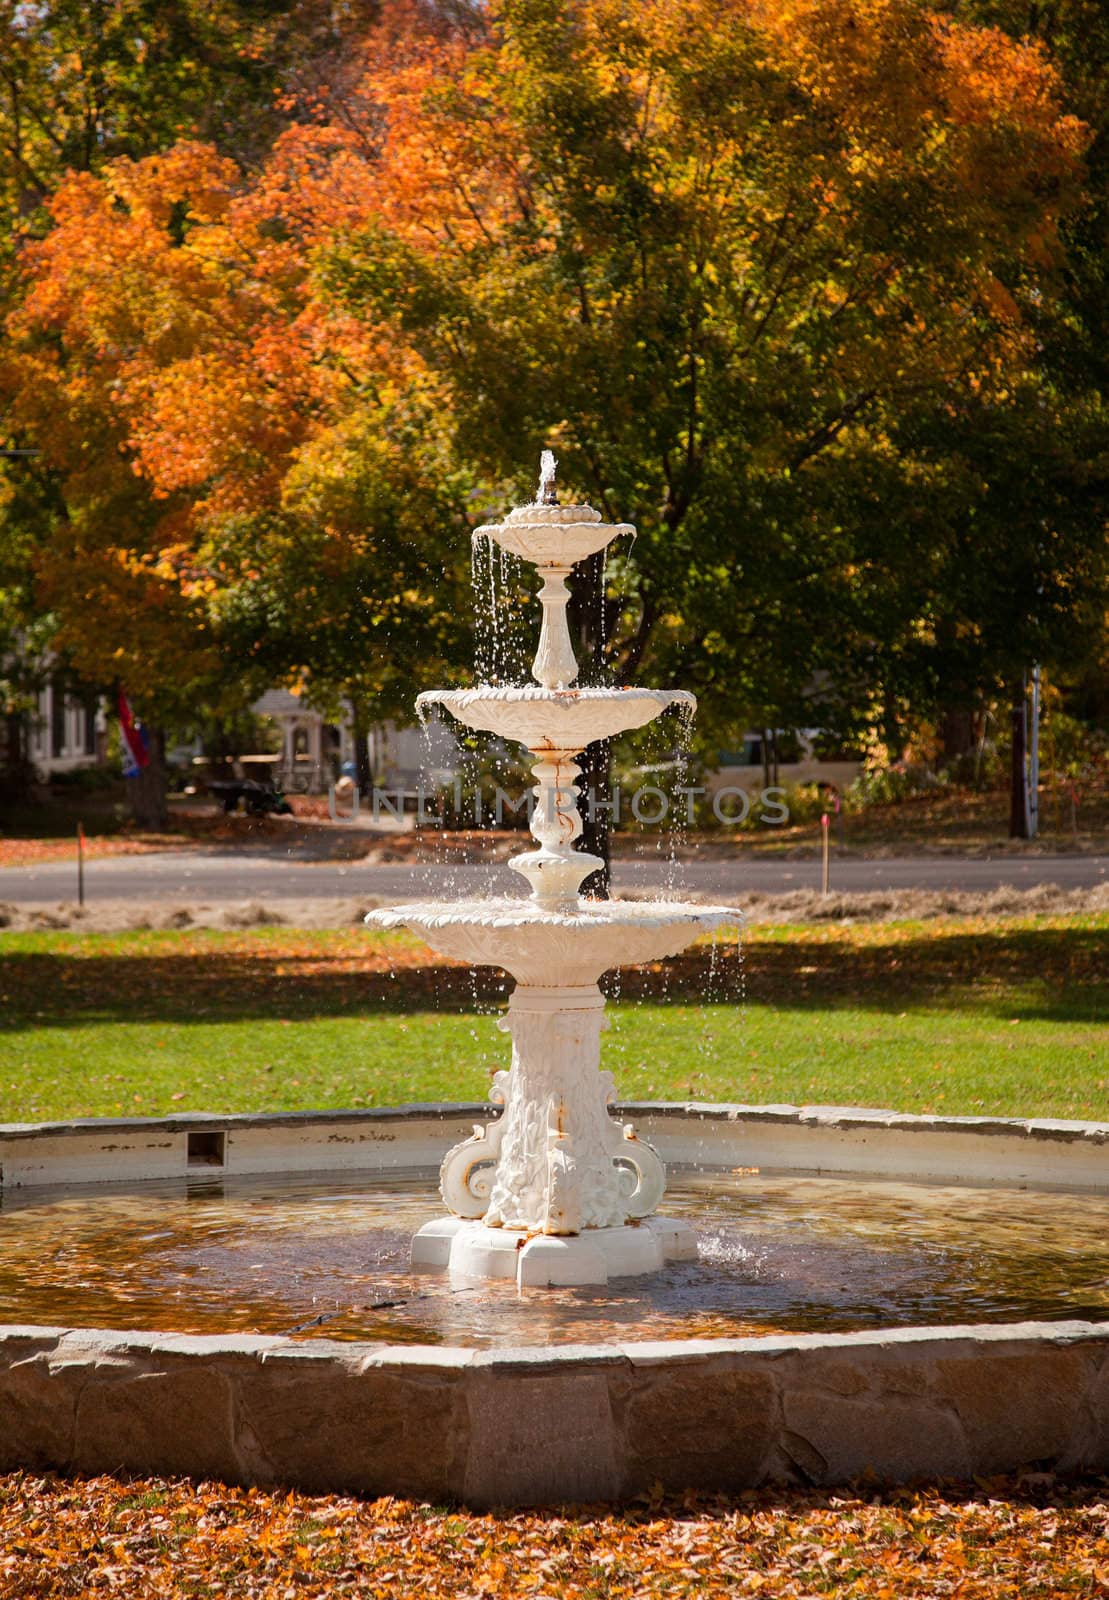 Leaves fill old fountain by steheap